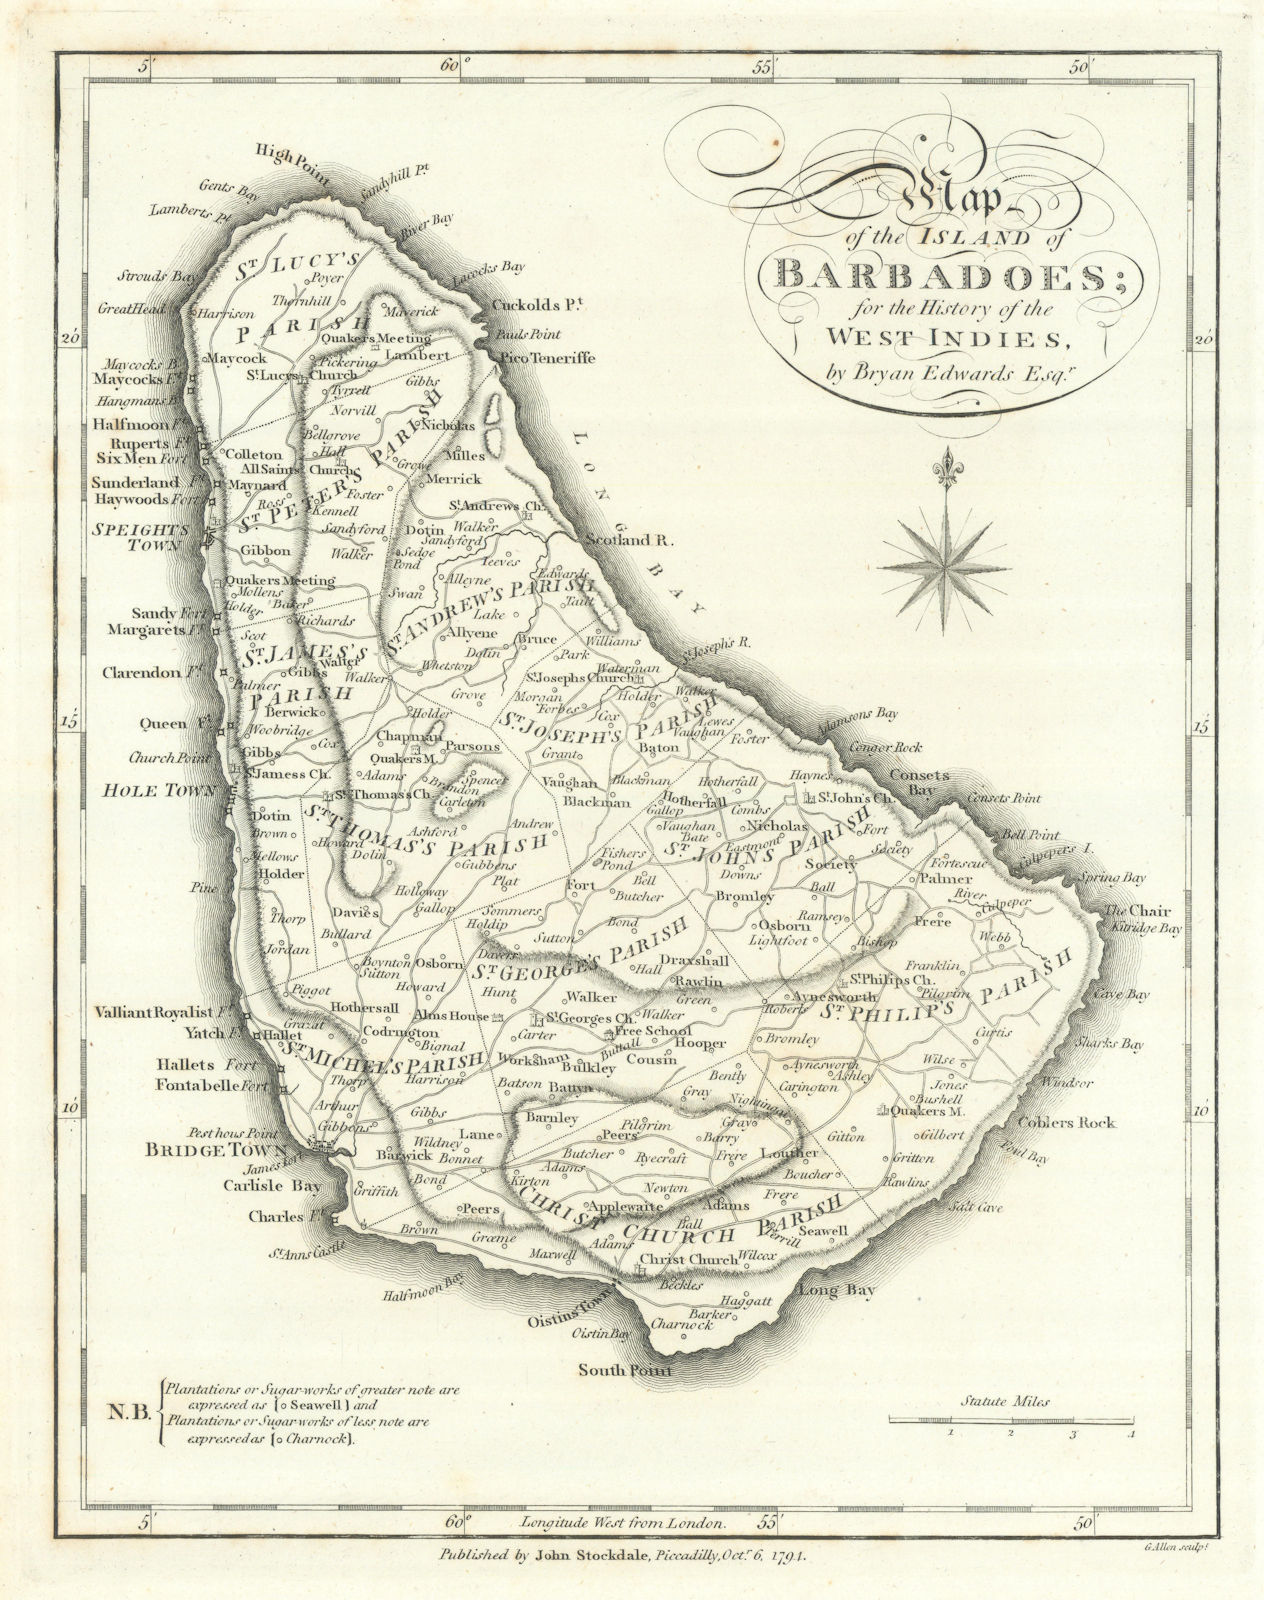 'A Map of the Island of Barbadoes', by Bryan EDWARDS. BARBADOS. West Indies 1794